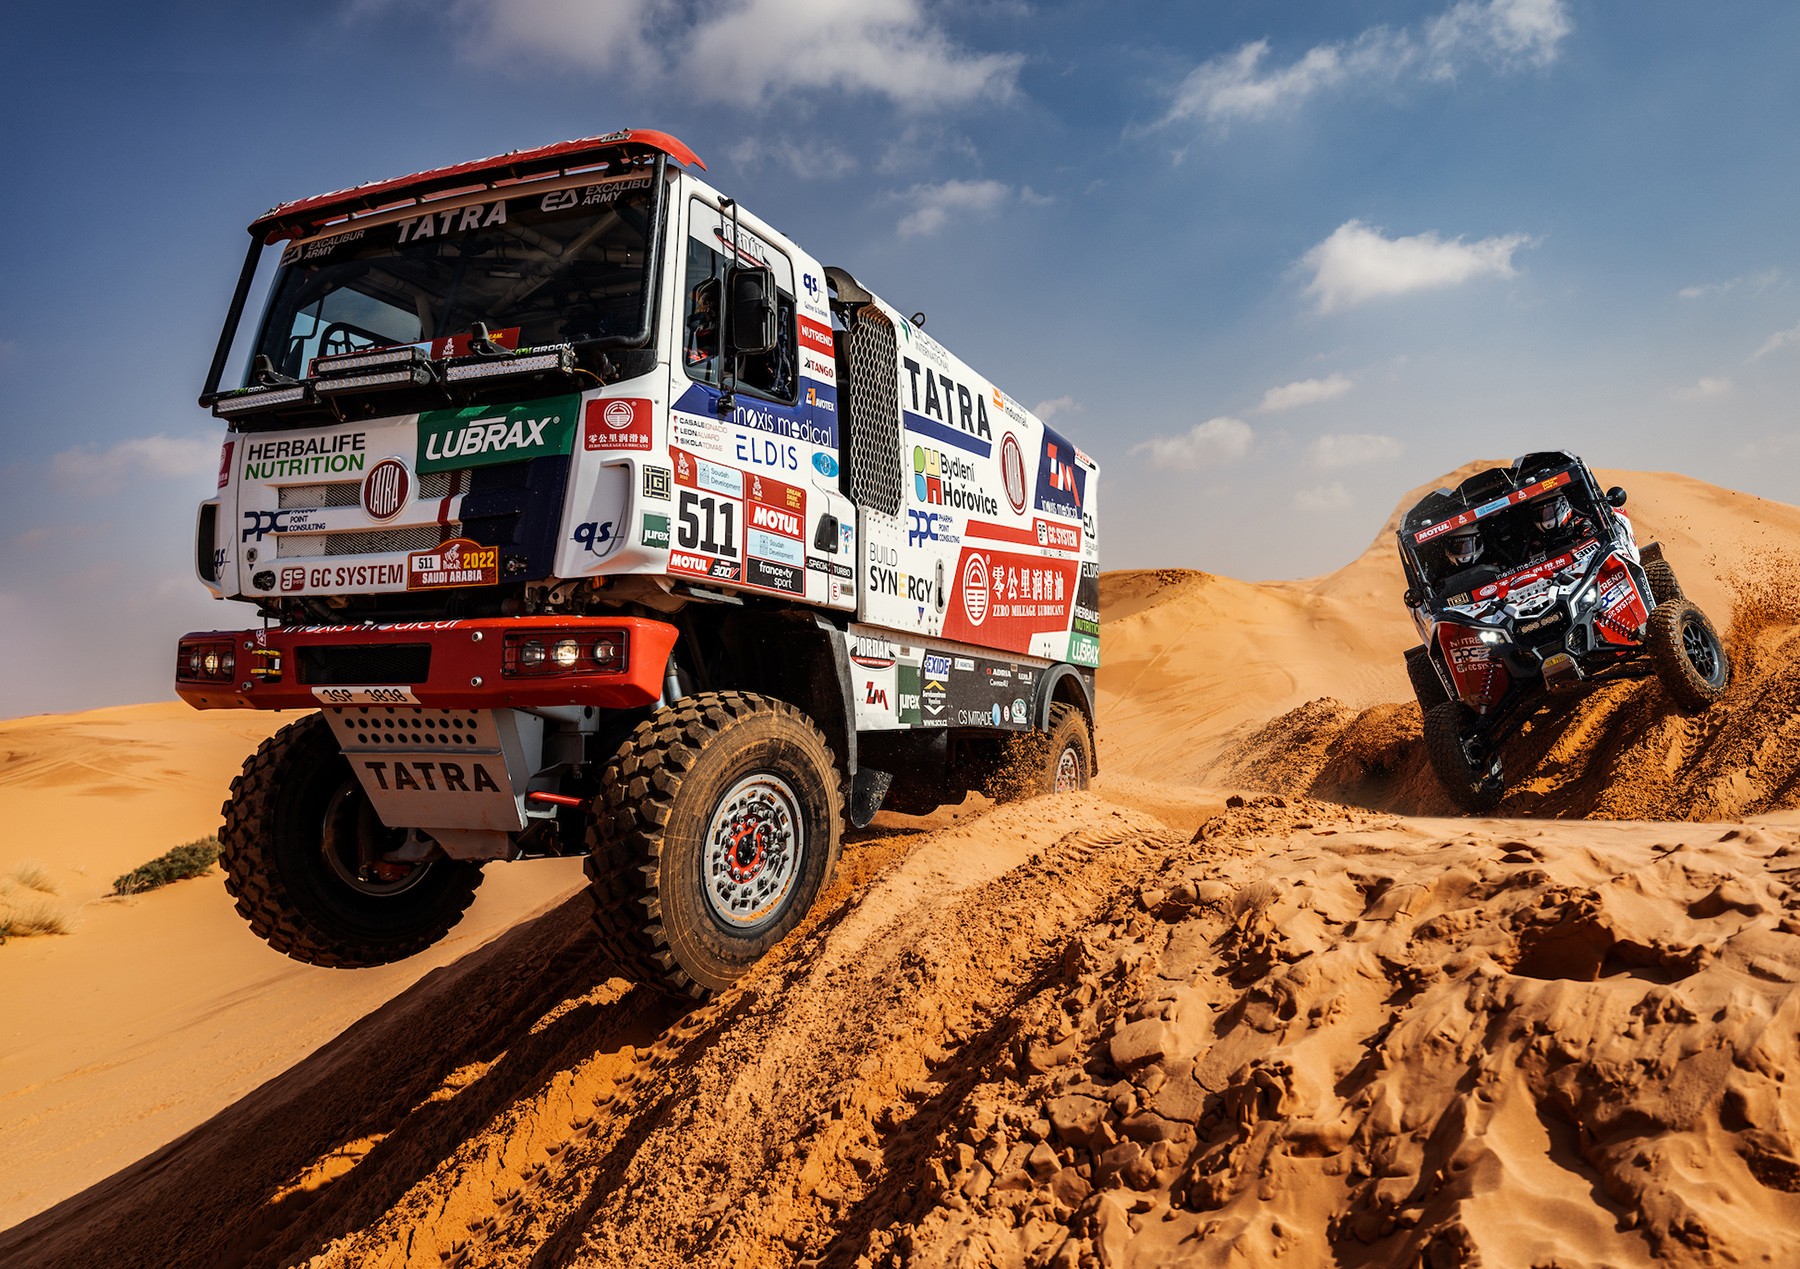 Next year’s Dakar Rally promises more deserts and more challenging stages. Buggyra is excited about the challenge.